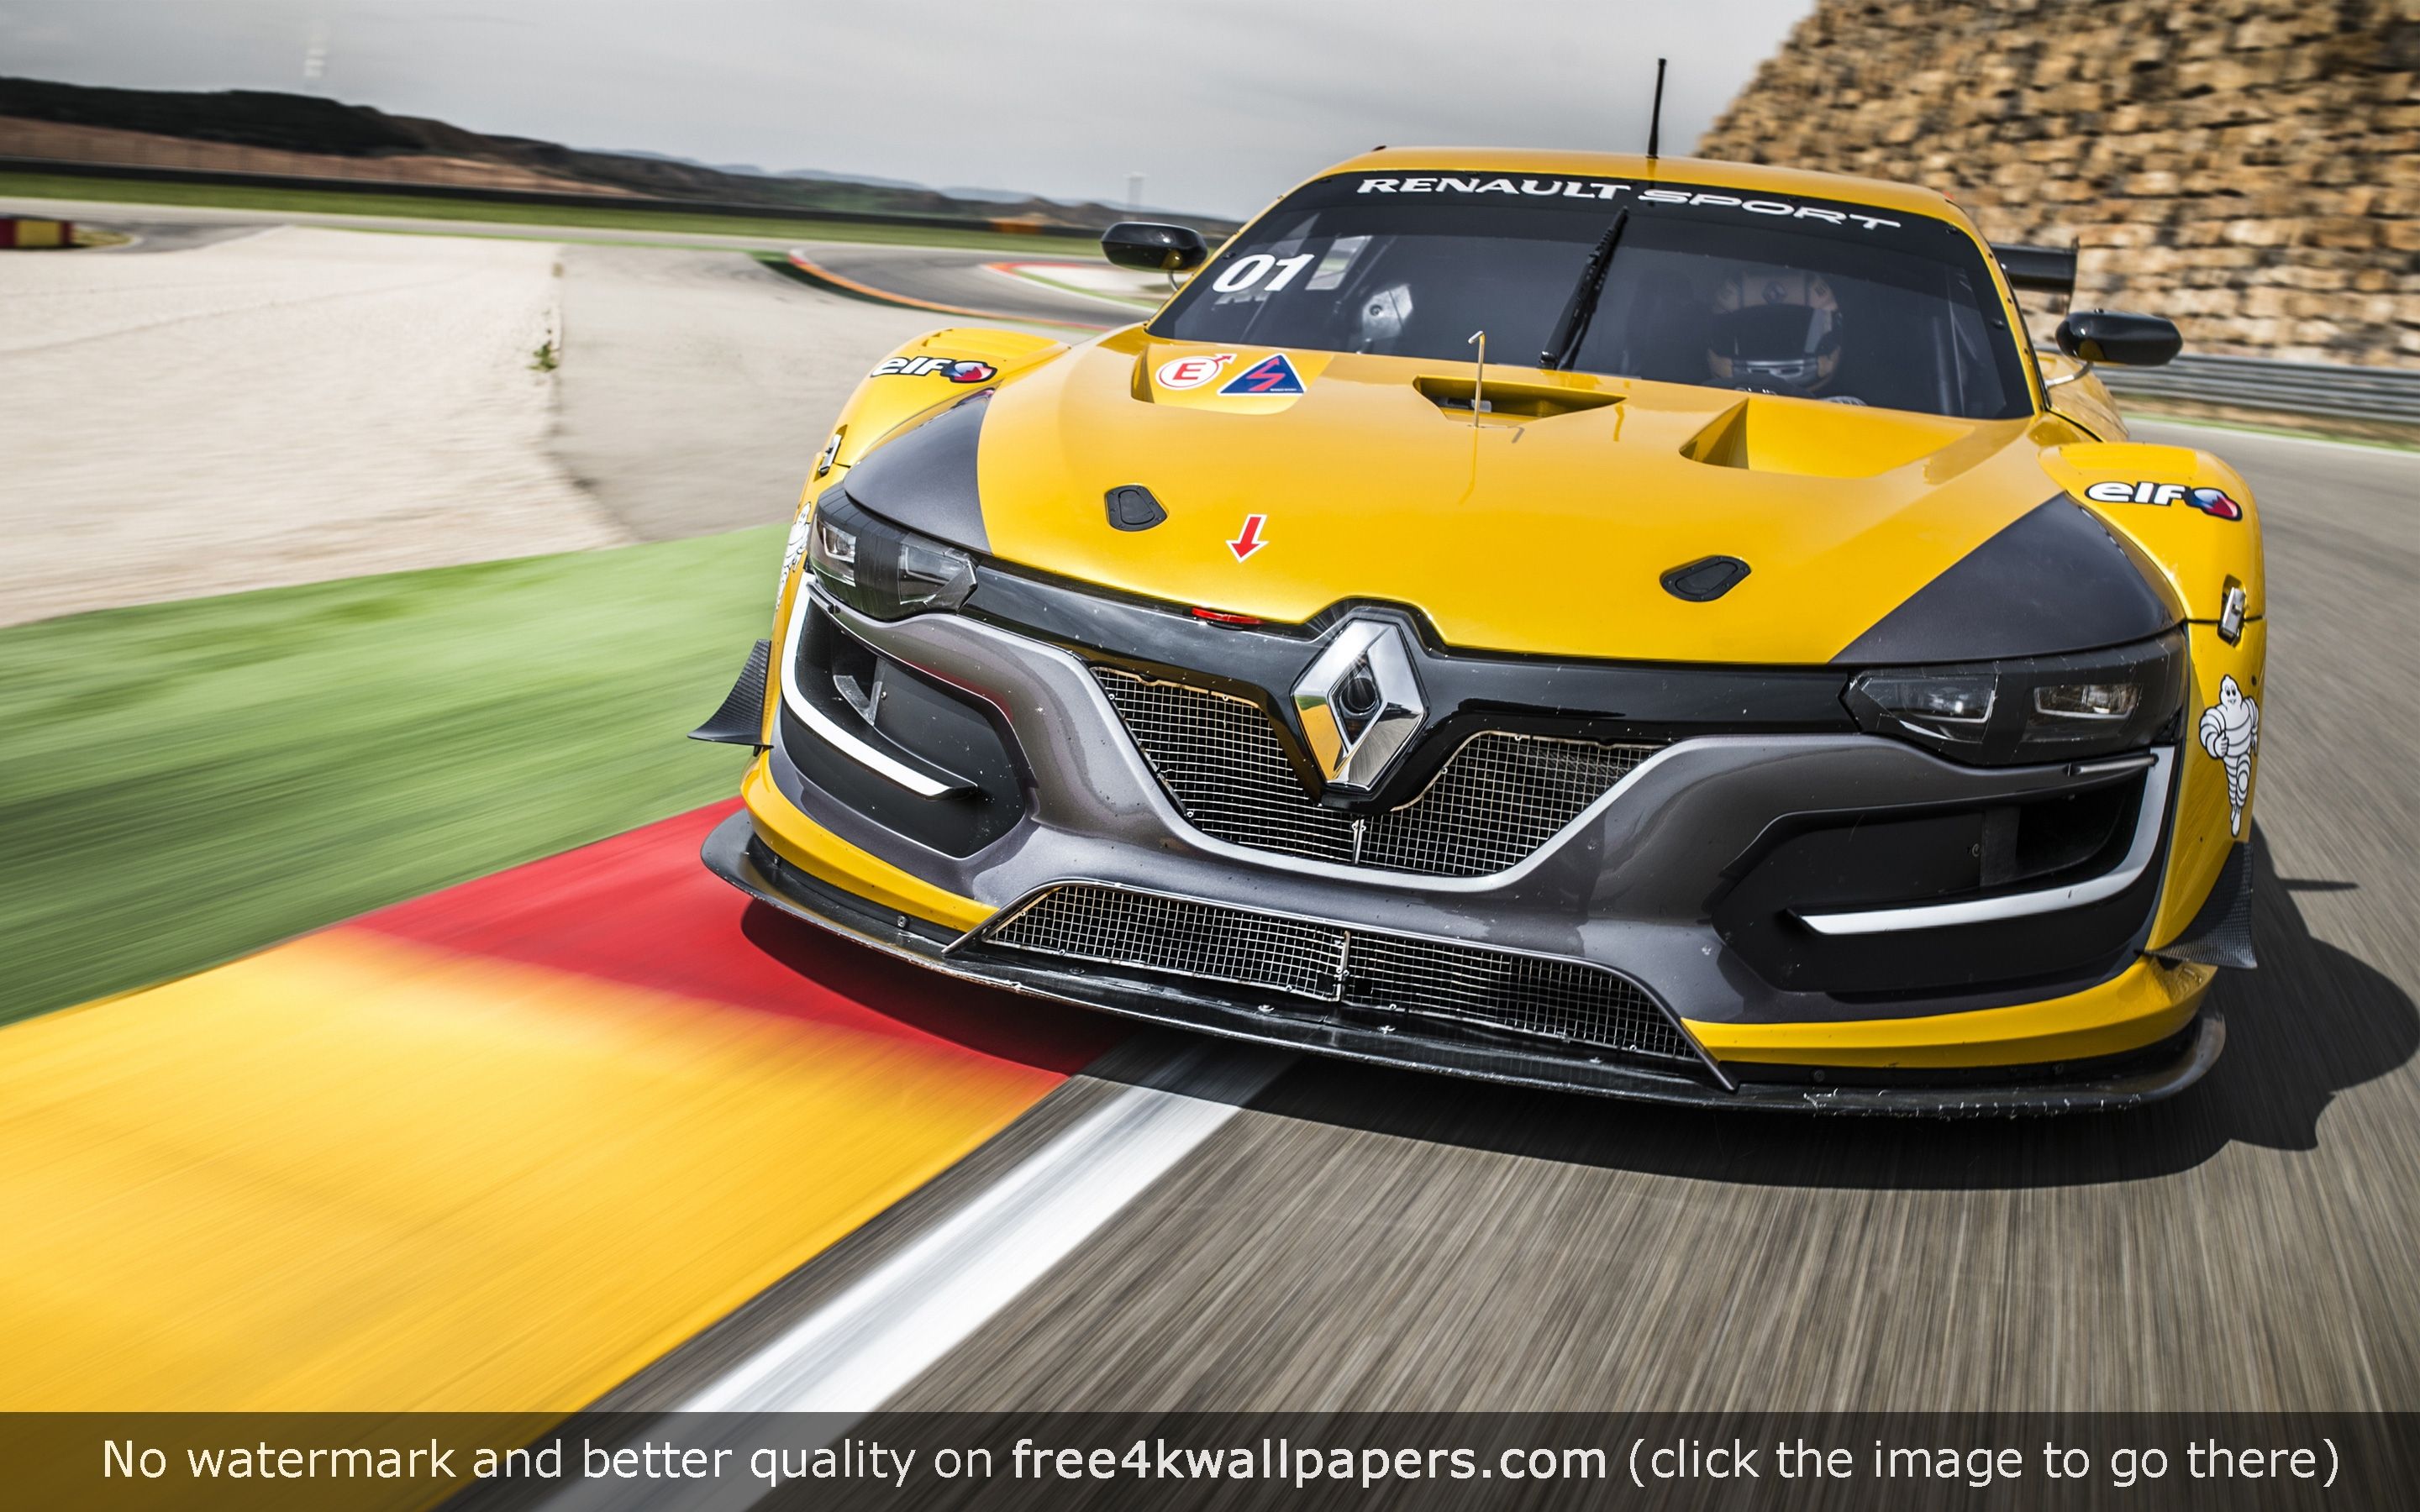 Renault Sport Rs Wallpapers